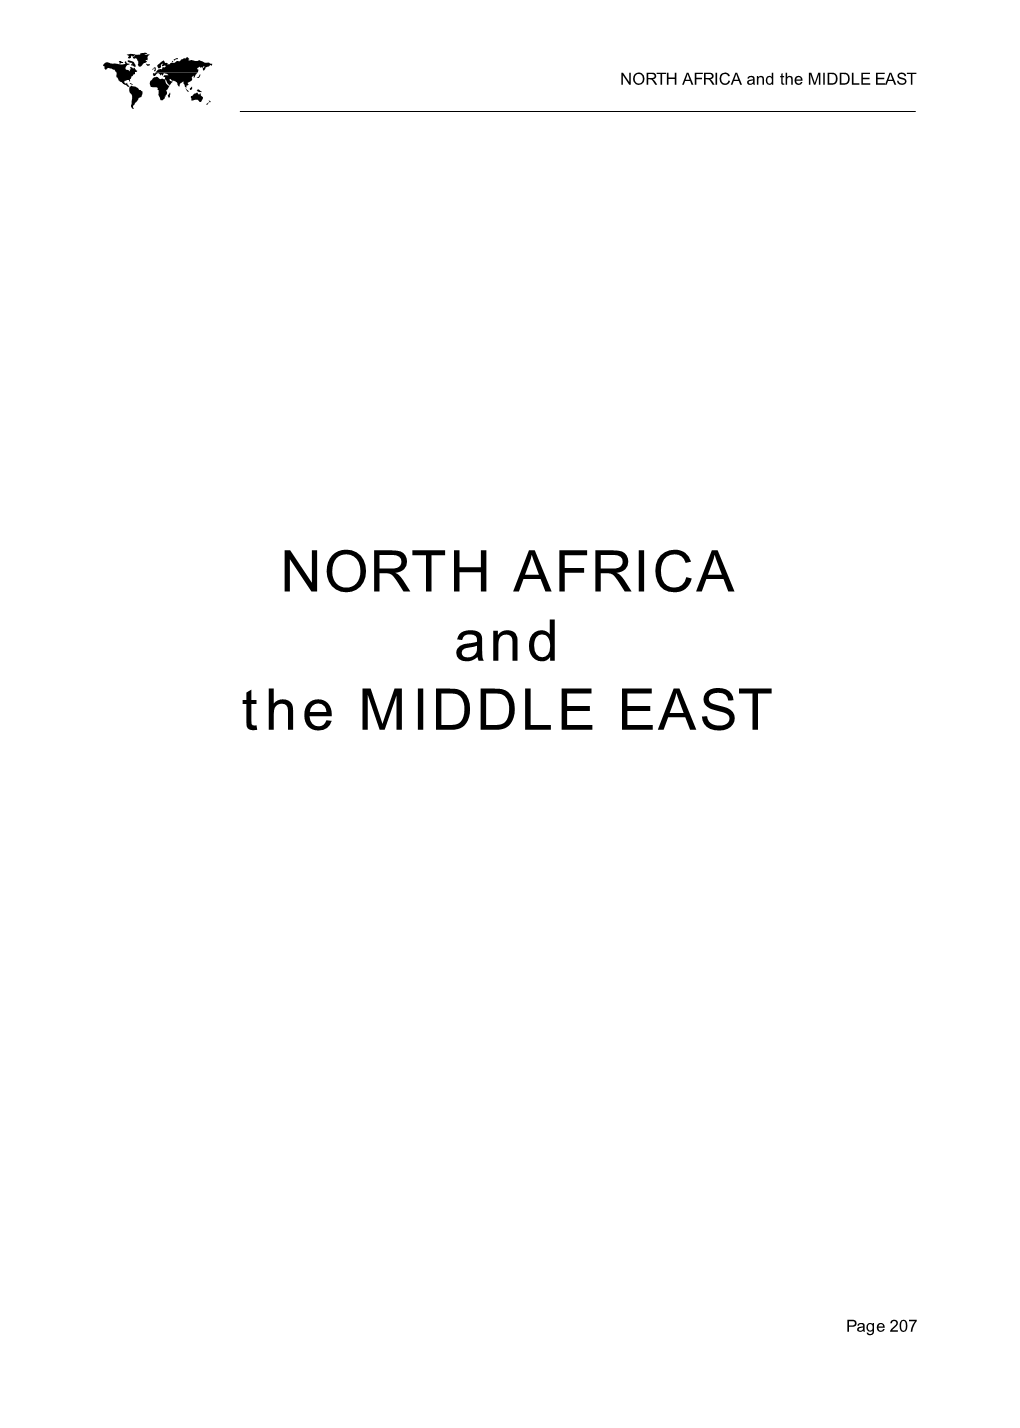 NORTH AFRICA and the MIDDLE EAST